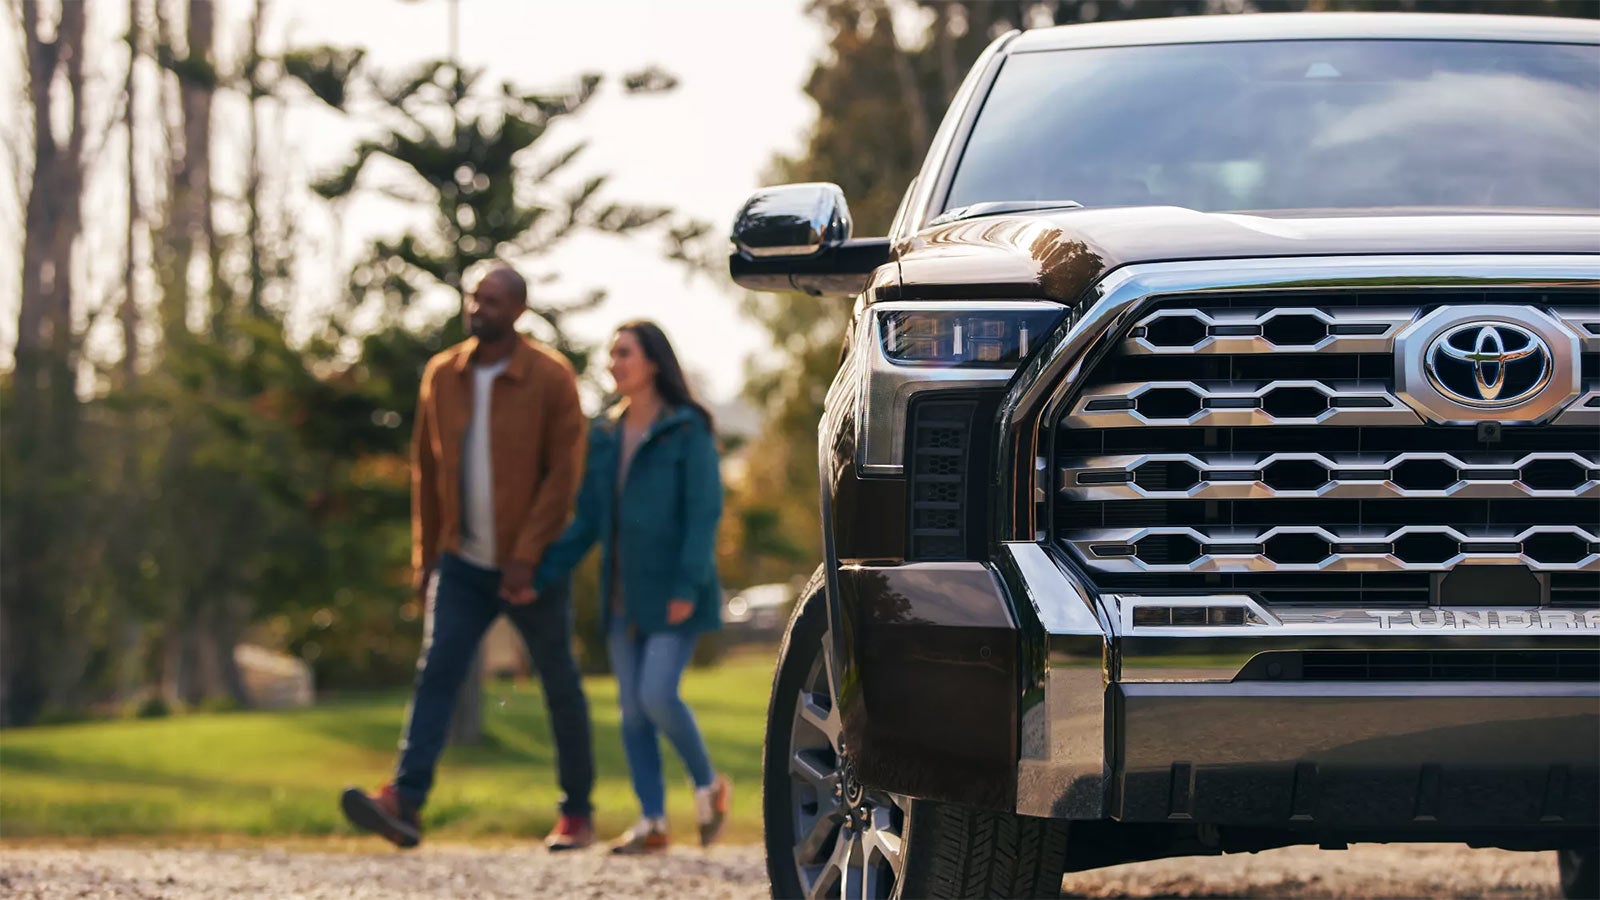 2022 Toyota Tundra Gallery | Seeger Toyota St. Louis in St Louis MO